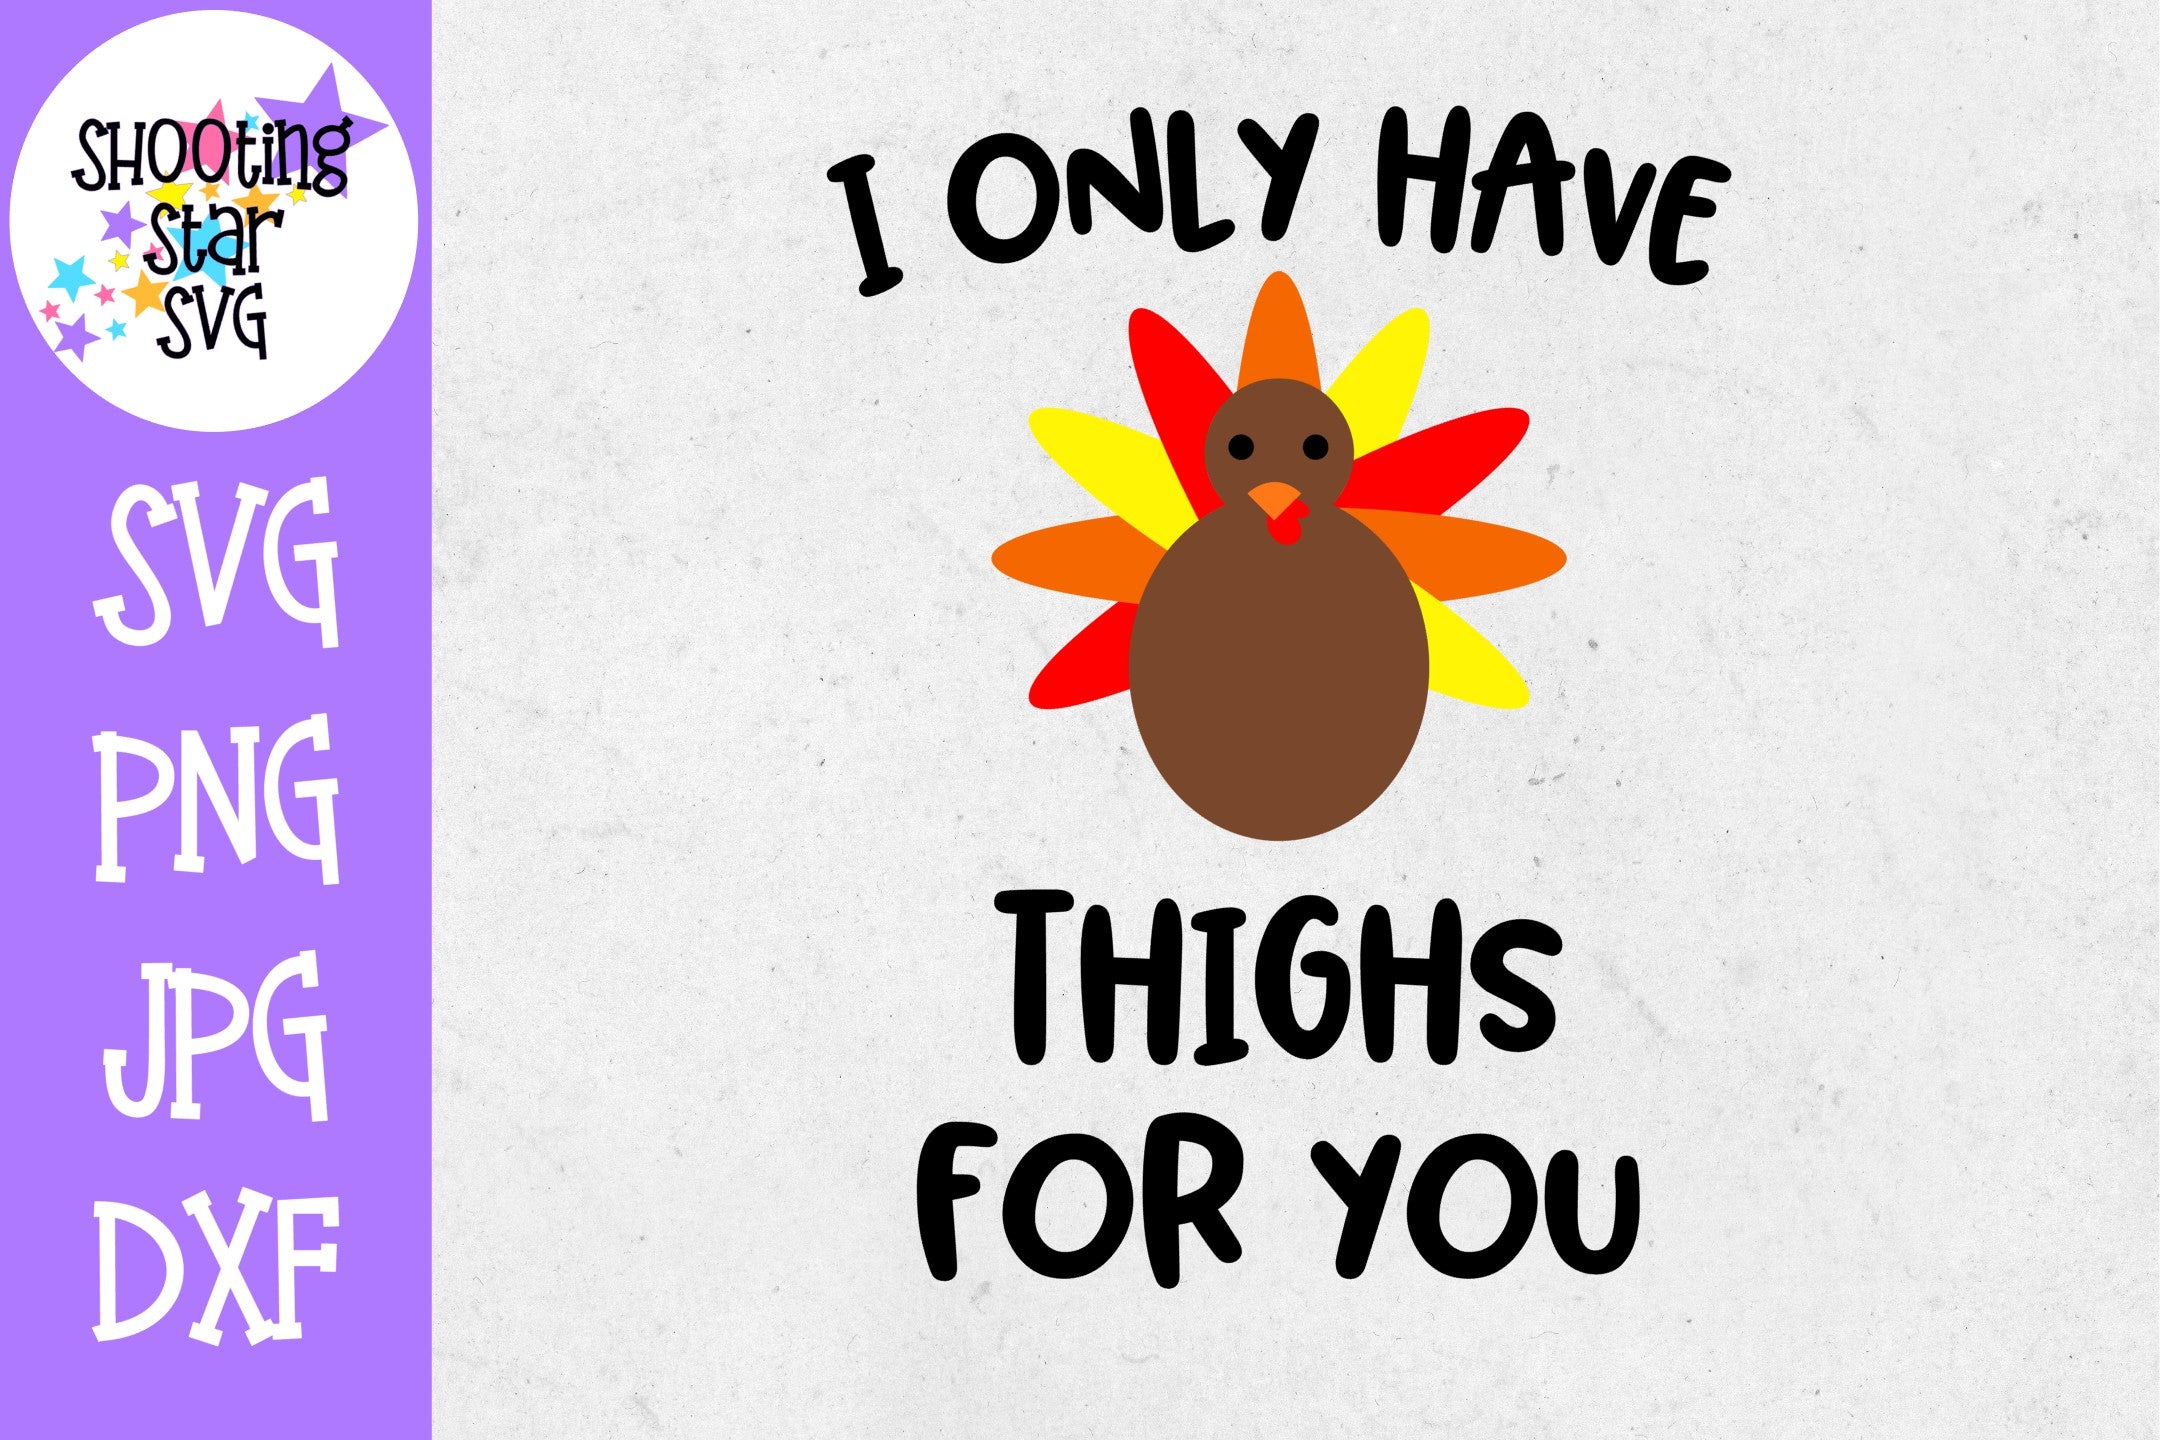 I Only Have Thighs for You SVG - Turkey SVG - Thanksgiving